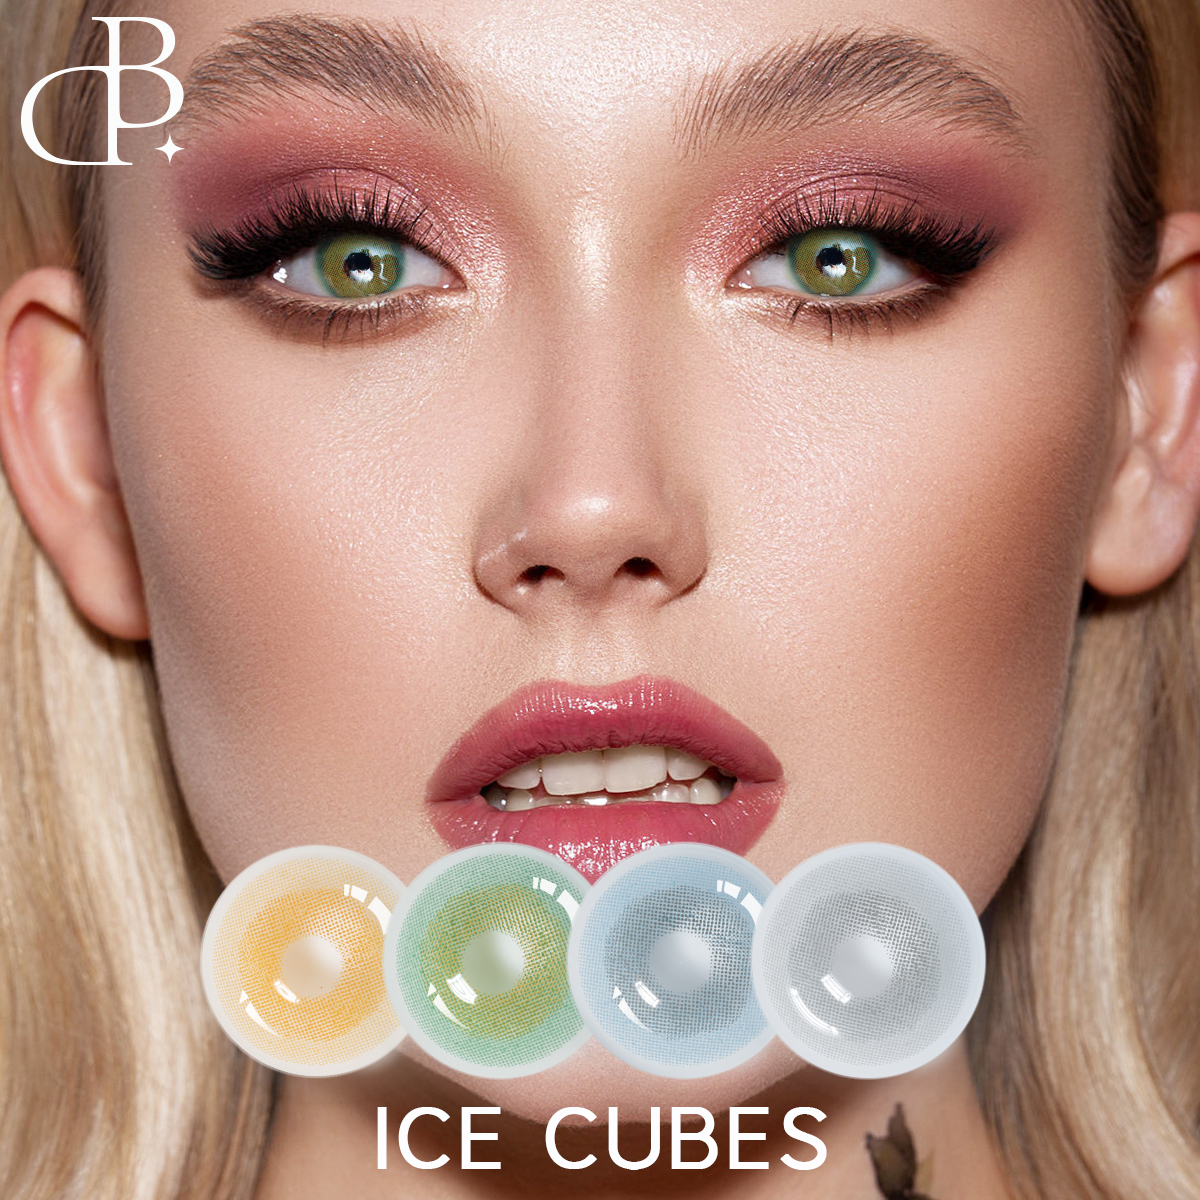 ICE CUBES Eye Lenses Color Contact Lenses Wholesale Customize Yearly Cosmetic Athena Quantity GAN Package